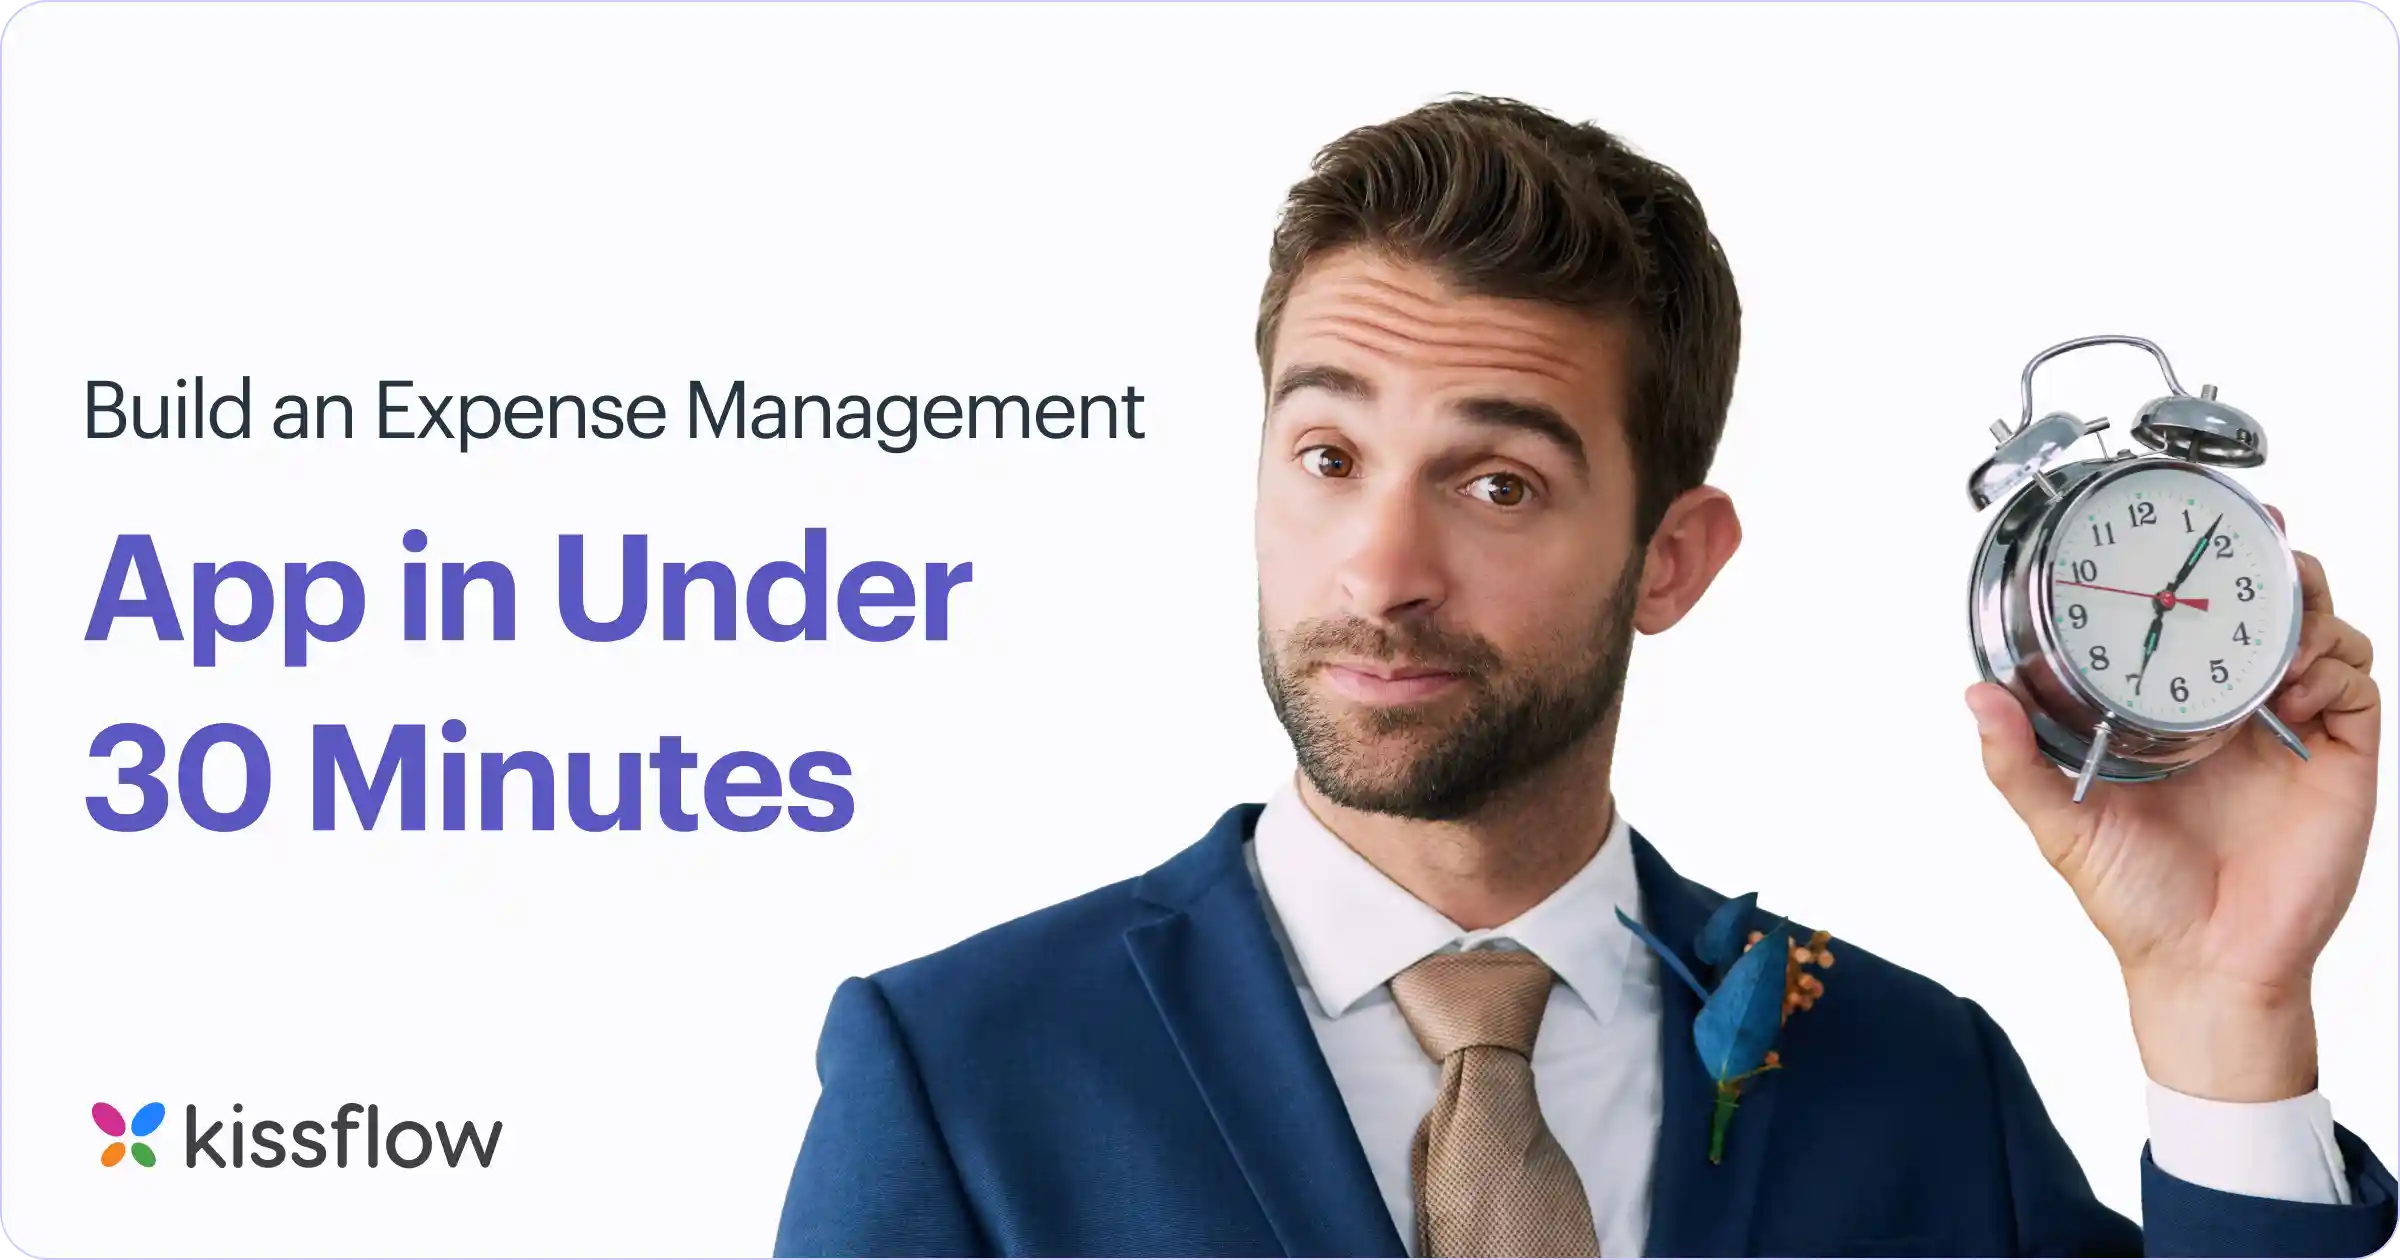 Build an Expense Management App in Under 30 Minutes